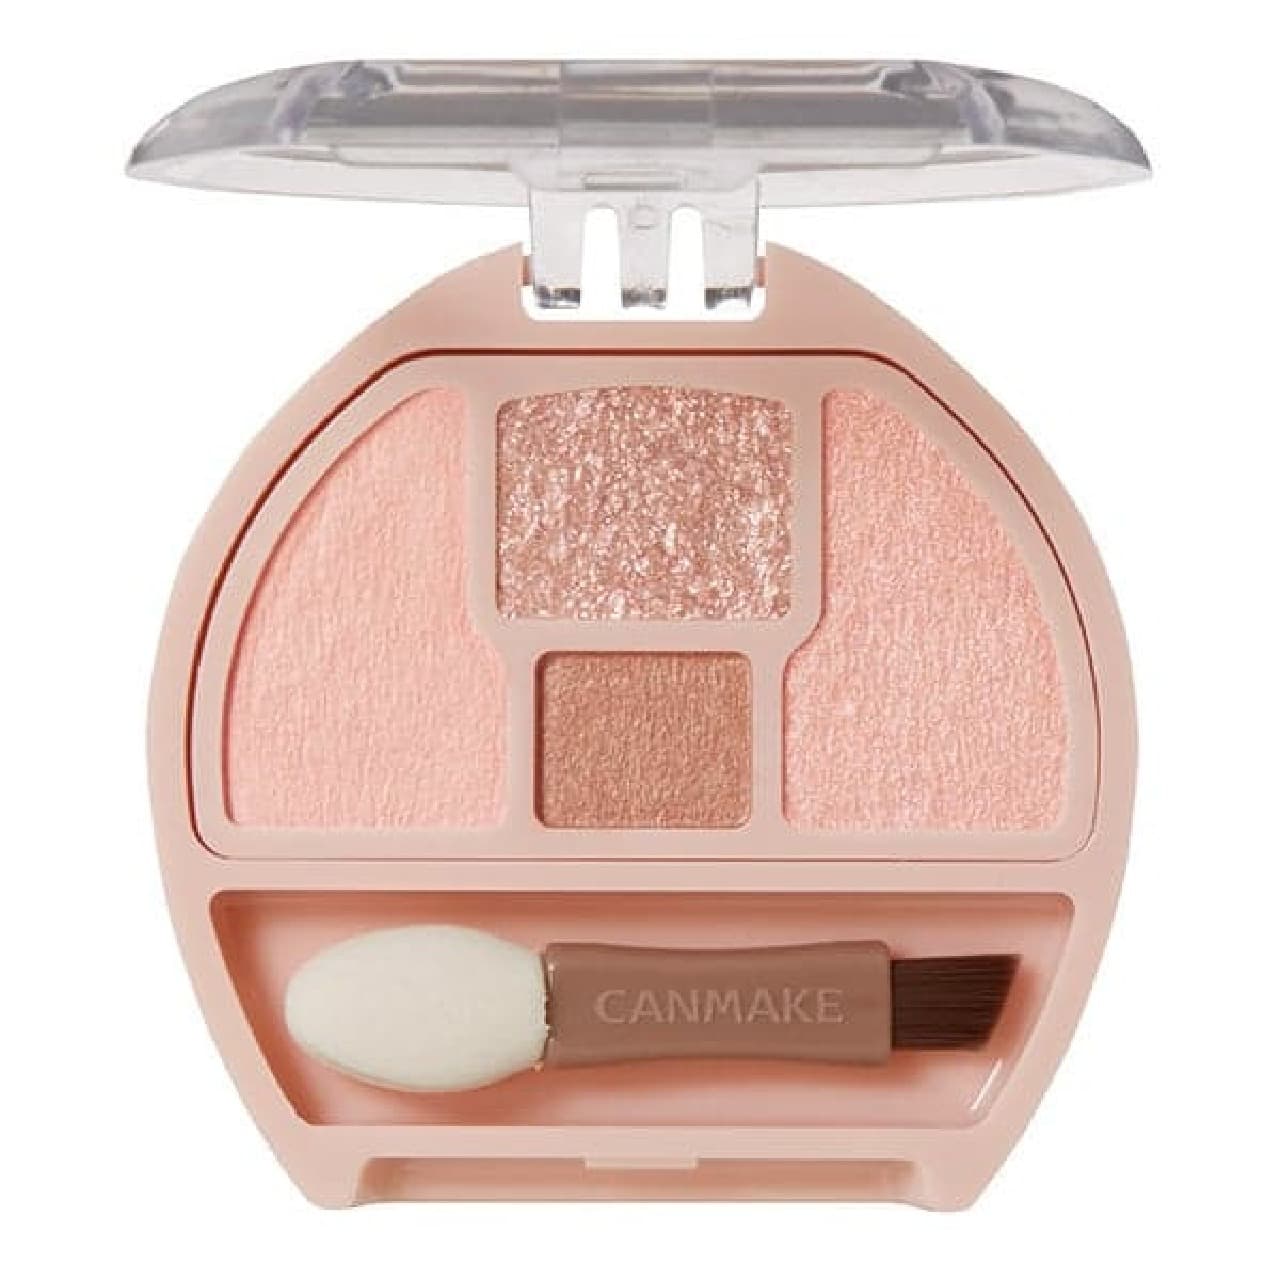 Canmake's "Plan Puku Coord Eyes" new and limited colors, strawberry design "Creamy Touch Liner", limited "Mermaid Skin Gel UV" to be released in late February 2024 Image 2